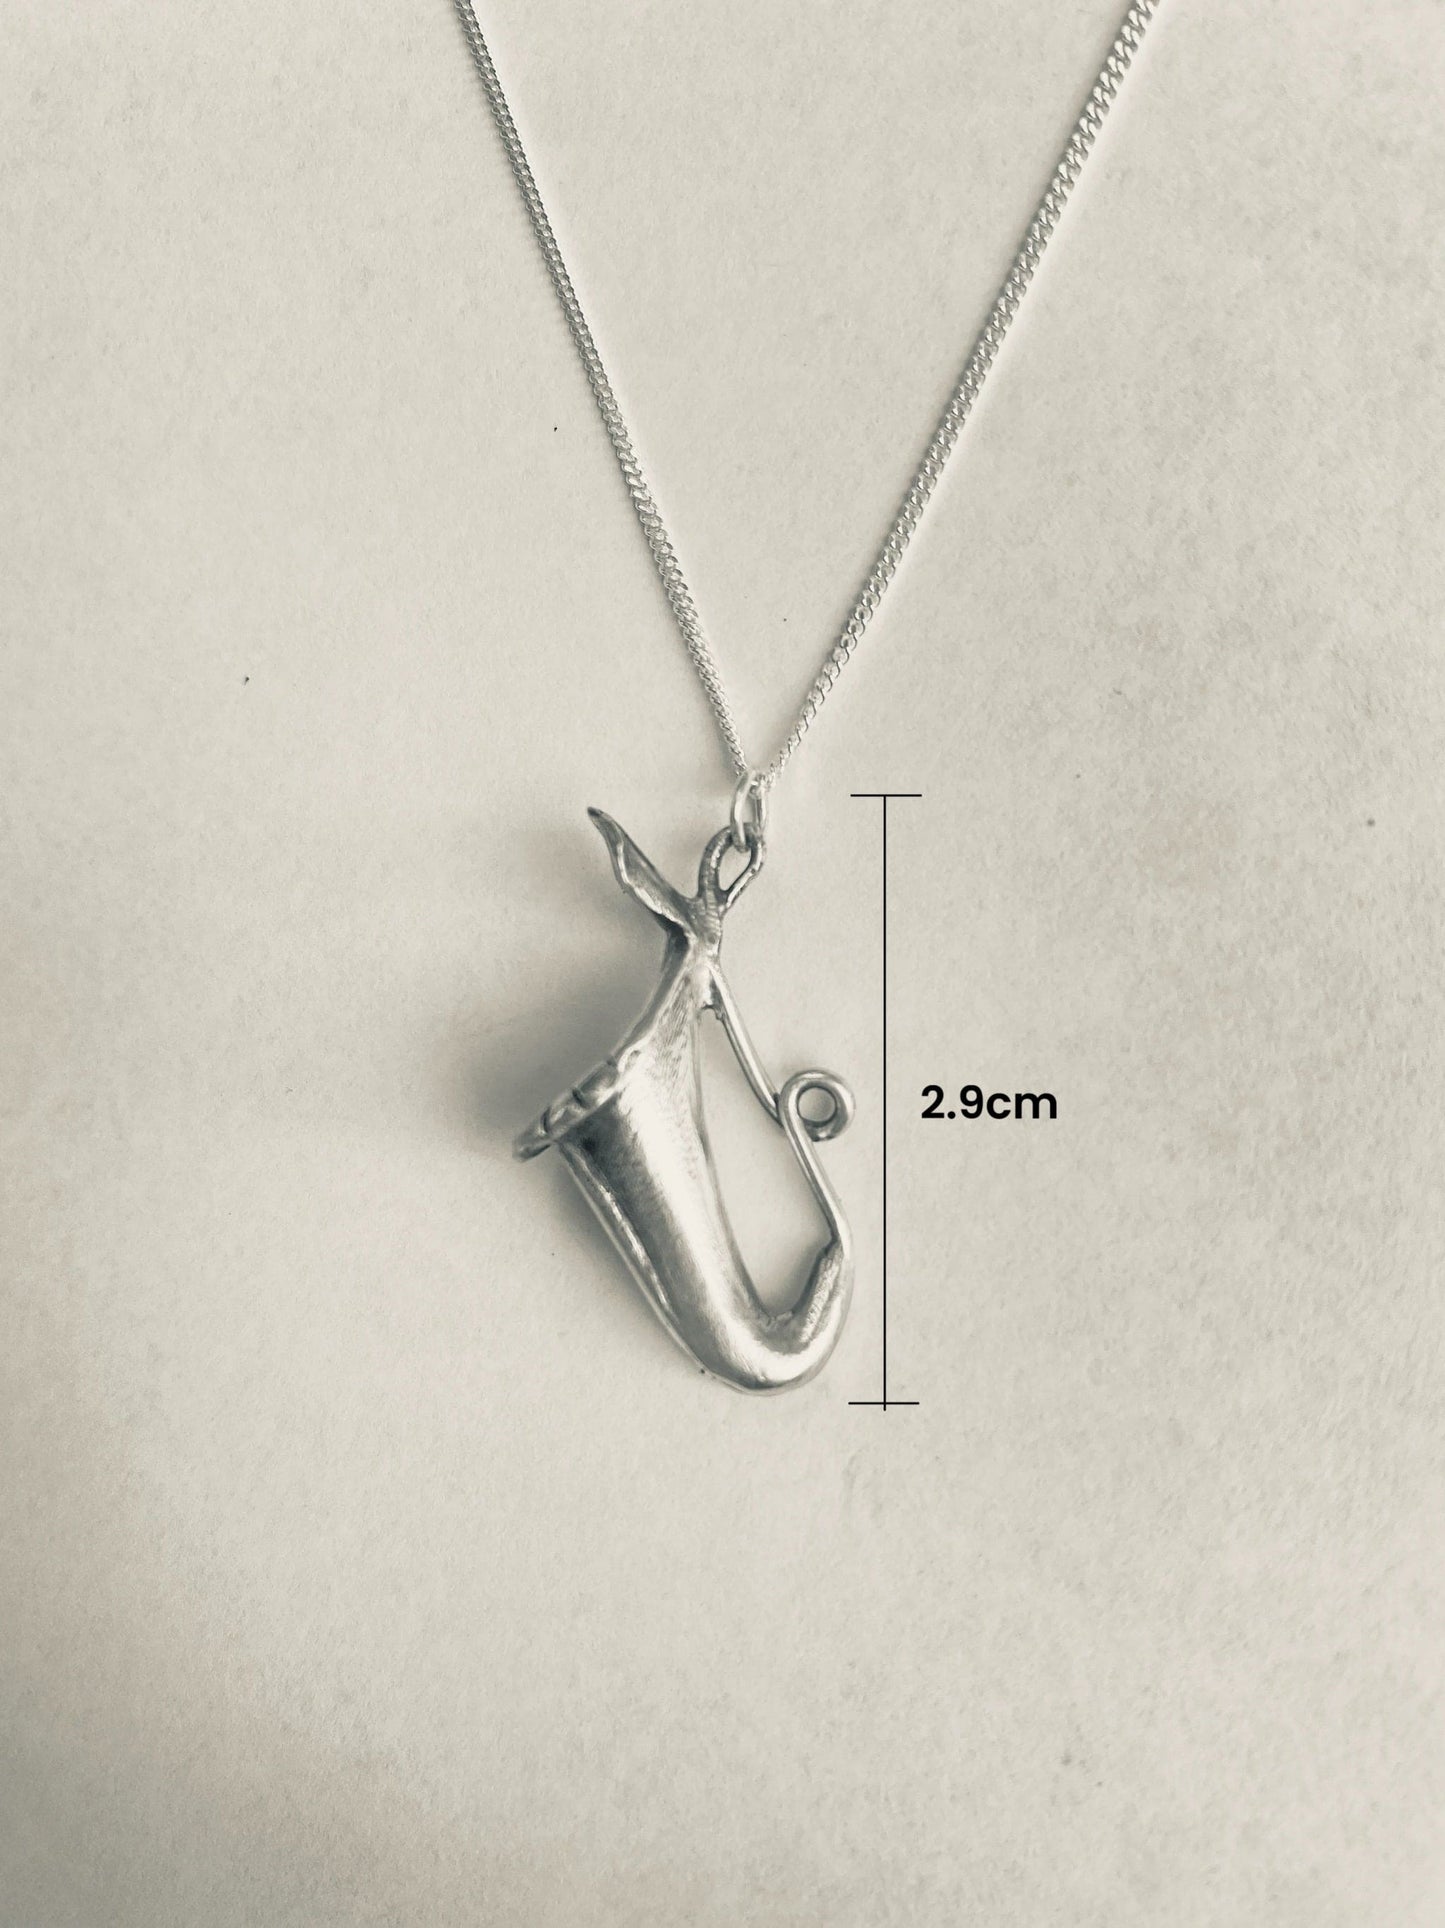 Nepenthes 'Pitcher Plant' Silver Pendant